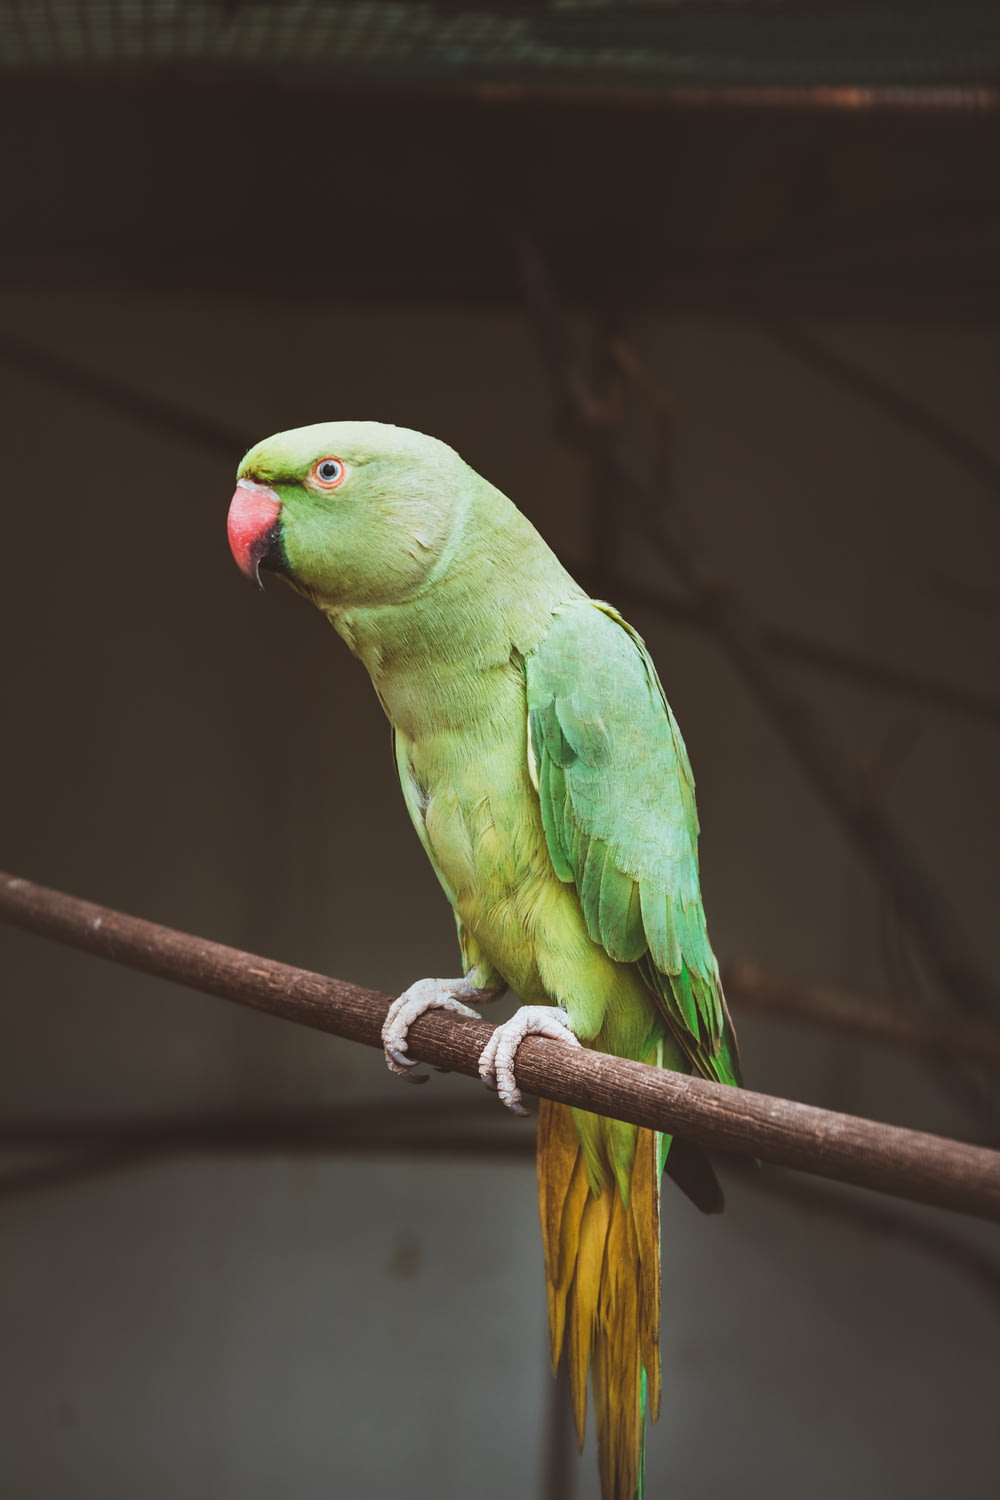 green parrot on tree branch during daytime